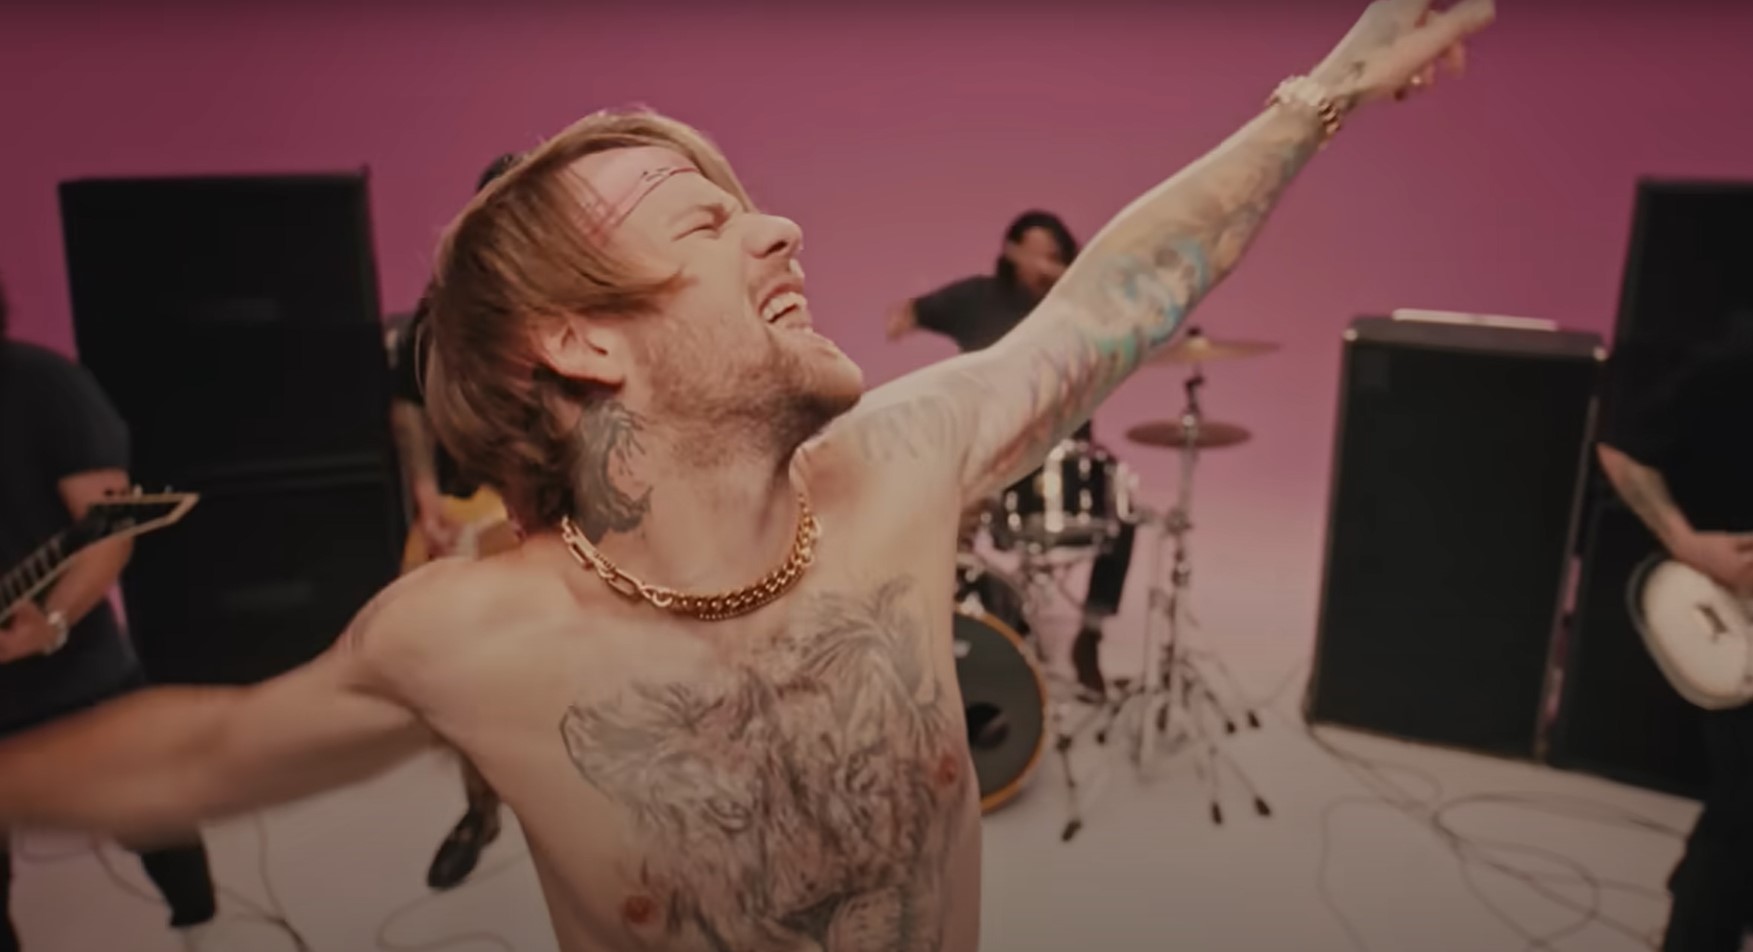 Watch The Video For "Might Love Myself" From Beartooth